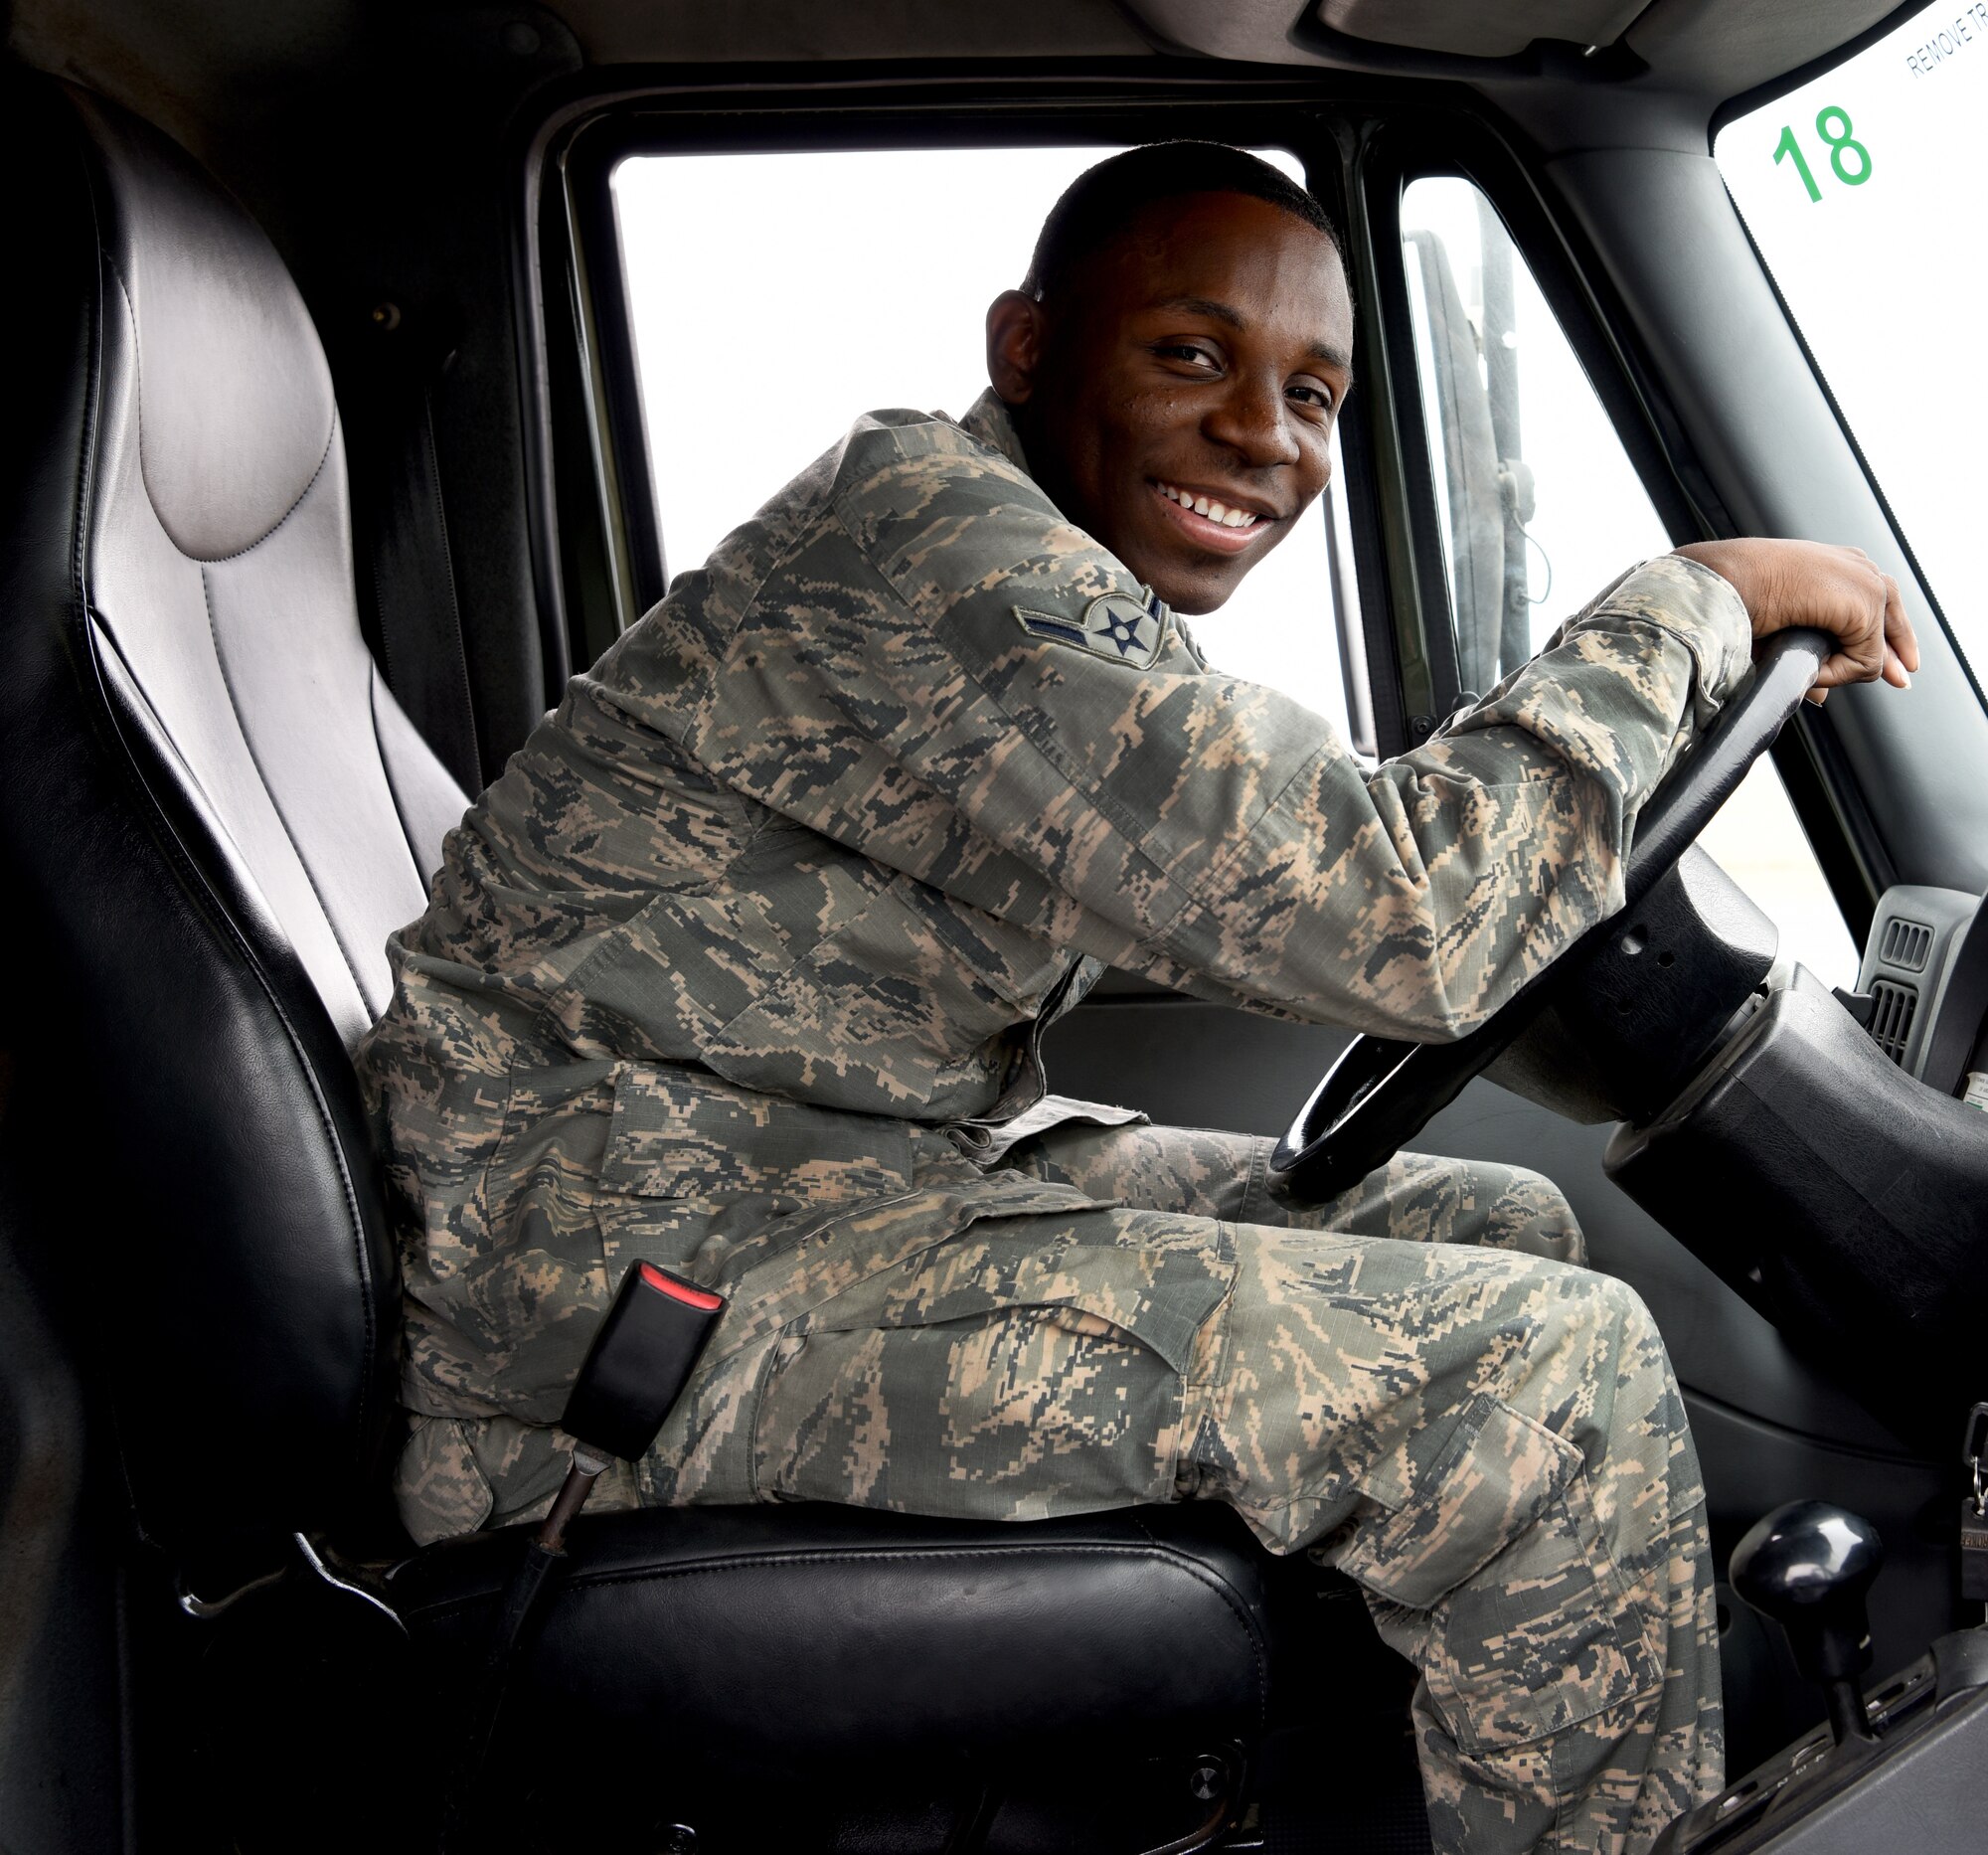 Airman Johnny Jackson, 56th Logistics Readiness Squadron fuels operations distributor, smiles for a portrait in the driver’s seat of his fuel truck April 19, 2018, at Luke Air Force Base, Ariz. Jackson, along with three other fuels operations distributors, won the 2018 Petroleum, Oil, and Lubricants “Roadeo” competition, wherein competitors raced to complete a series of timed objectives with a fuel truck. (U.S. Air Force photo by Airman 1st Class Aspen Reid)